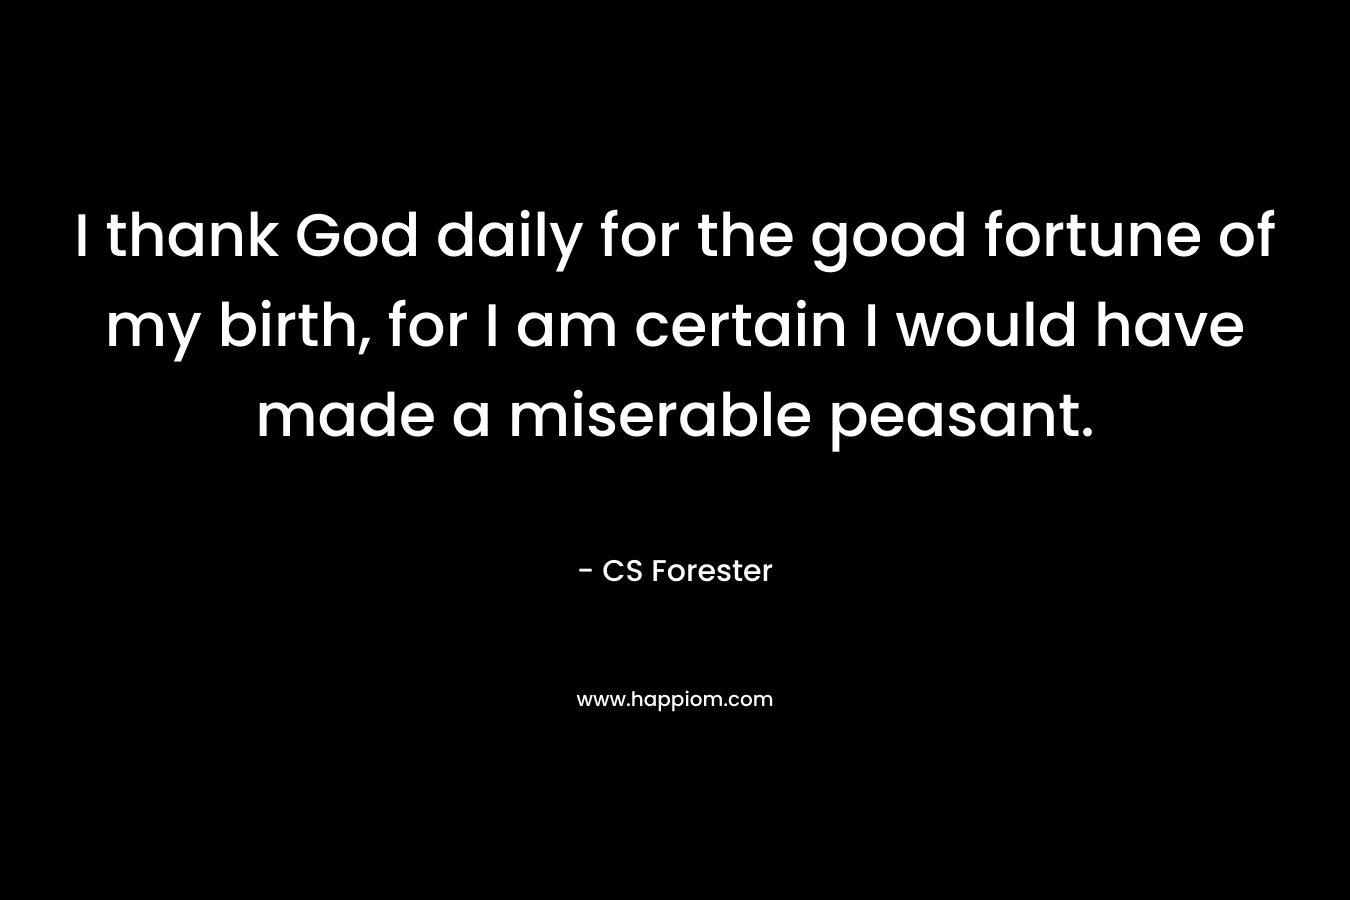 I thank God daily for the good fortune of my birth, for I am certain I would have made a miserable peasant.